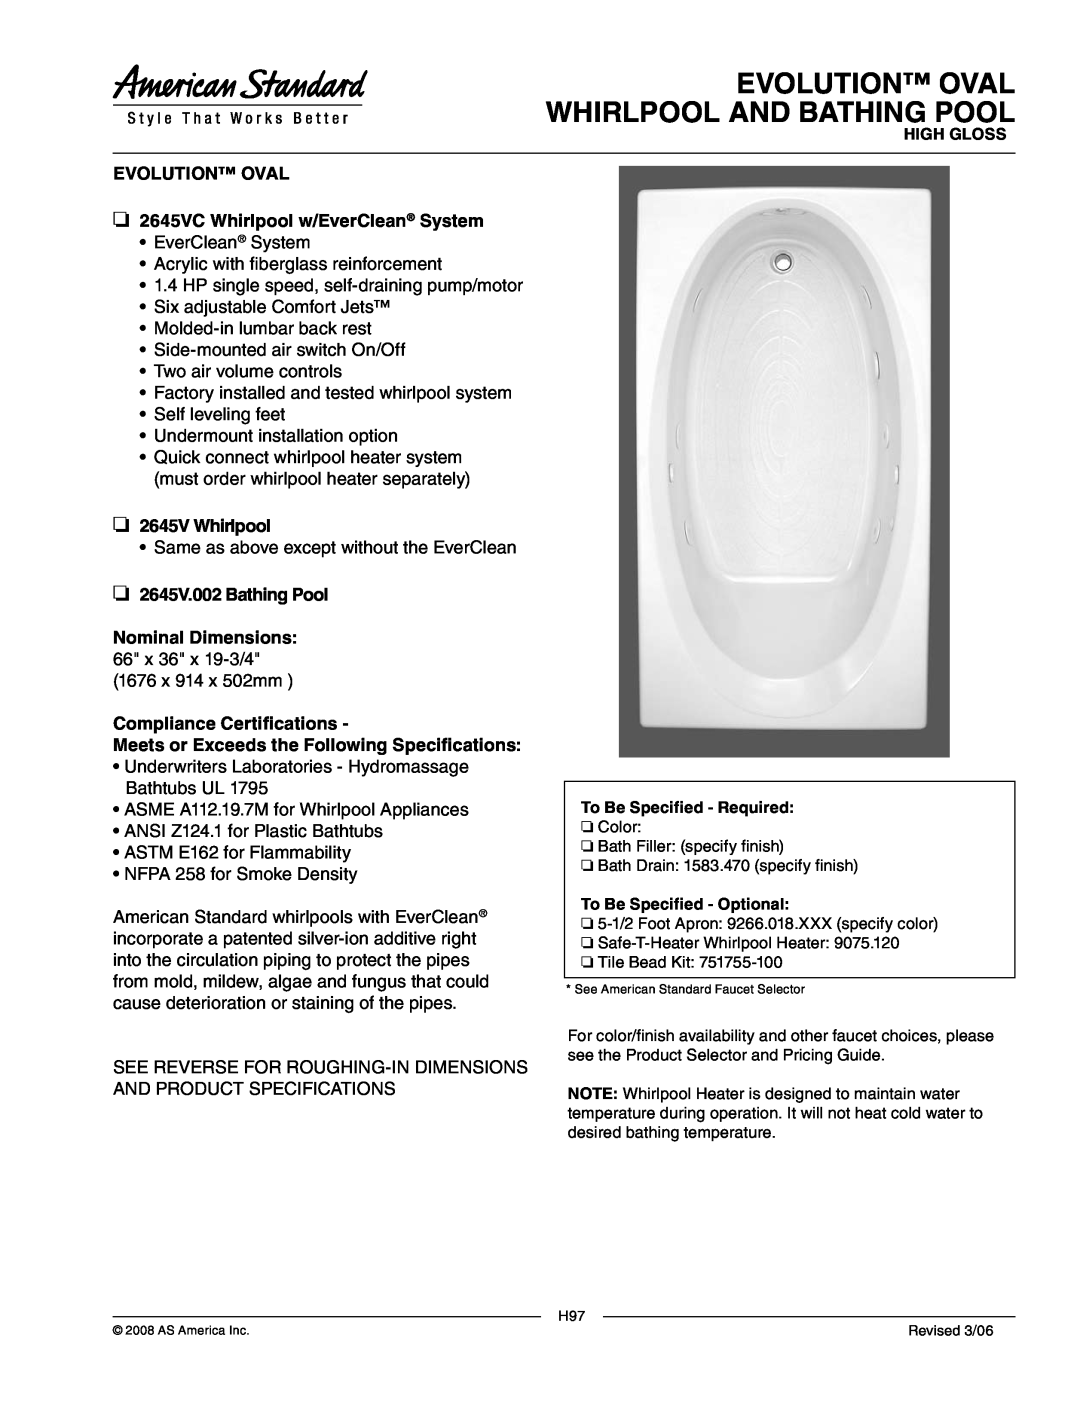 American Standard 2645V.002 dimensions Evolution Oval Whirlpool And Bathing Pool, 2645VC Whirlpool w/EverClean System 